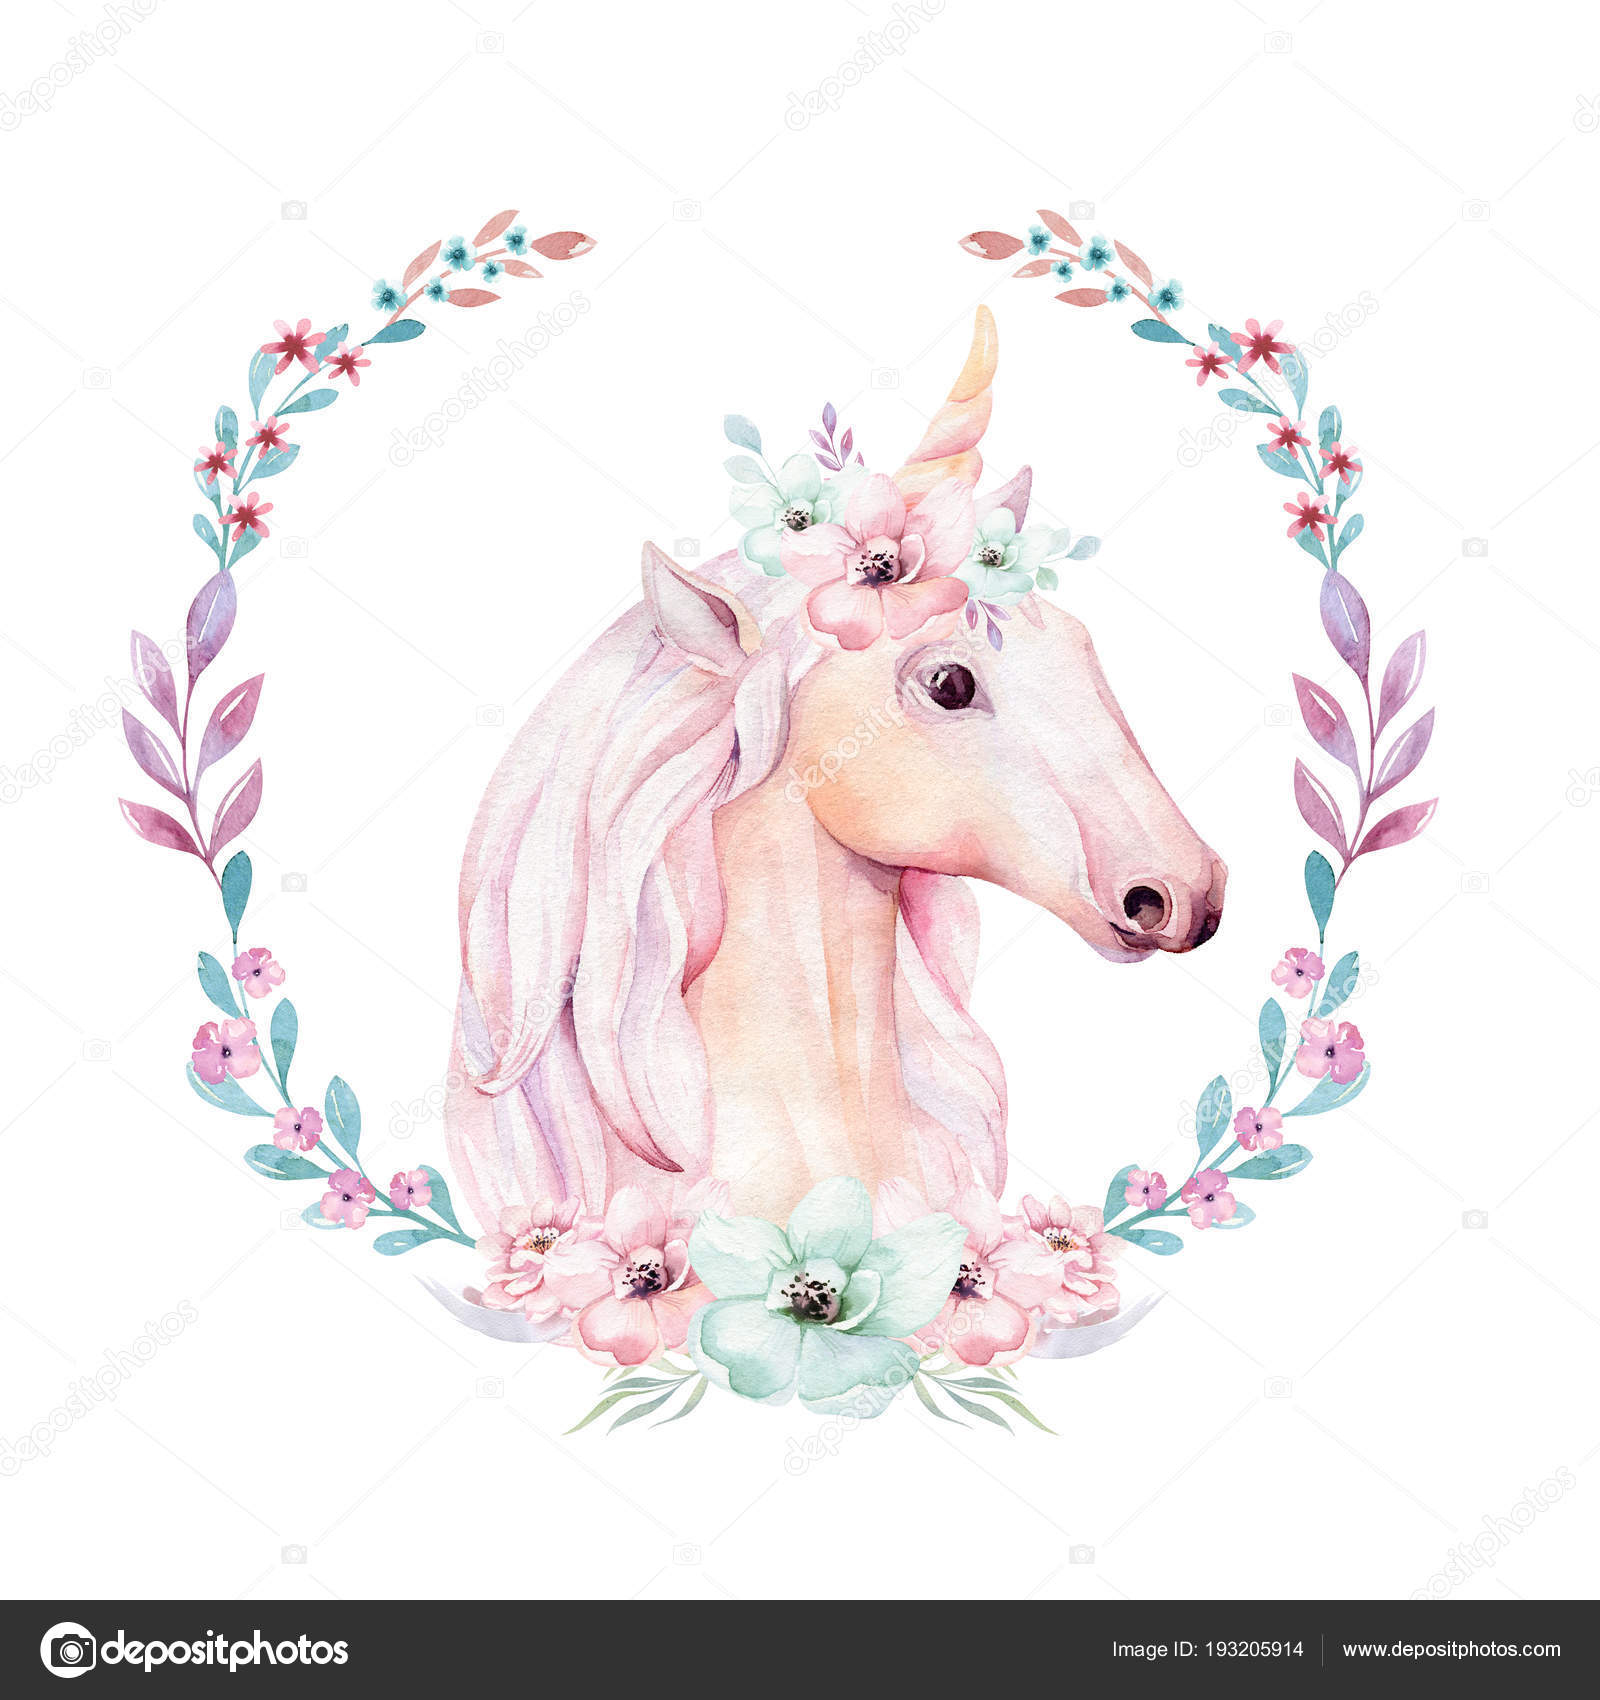 cute horse png Peony wreath clipart floral bouquet png Watercolor floral unicorn clipart unicorn poster unicorn with flowers png